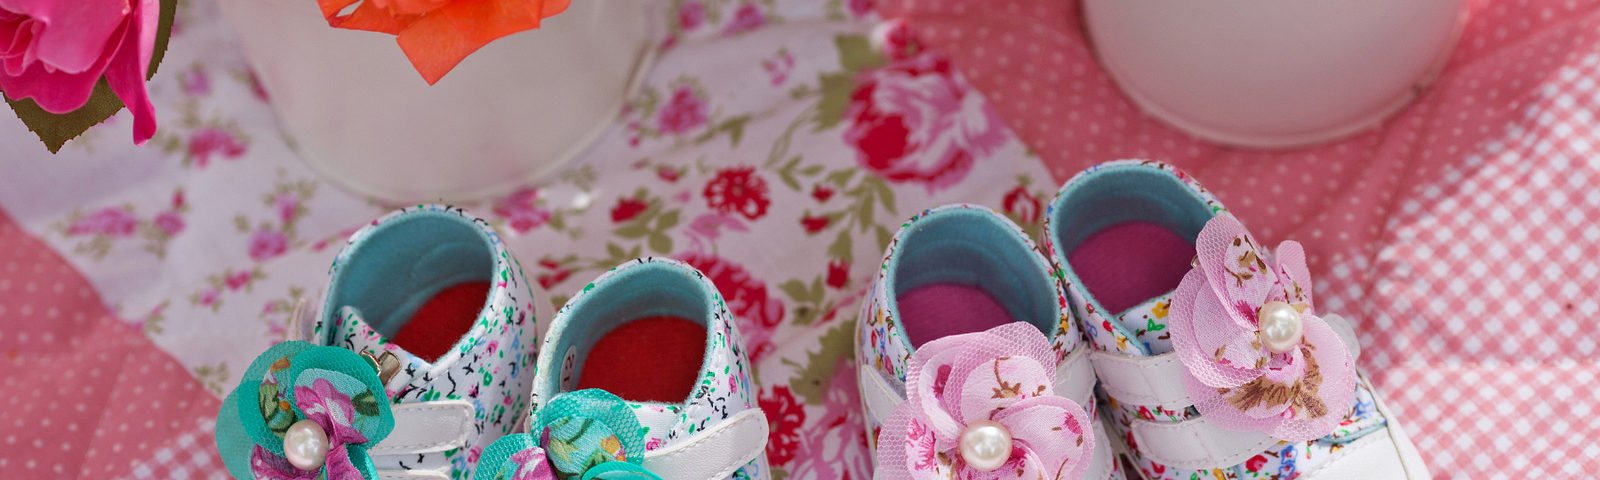 Flowers and Two Sets of Baby Shoes on a Quilt